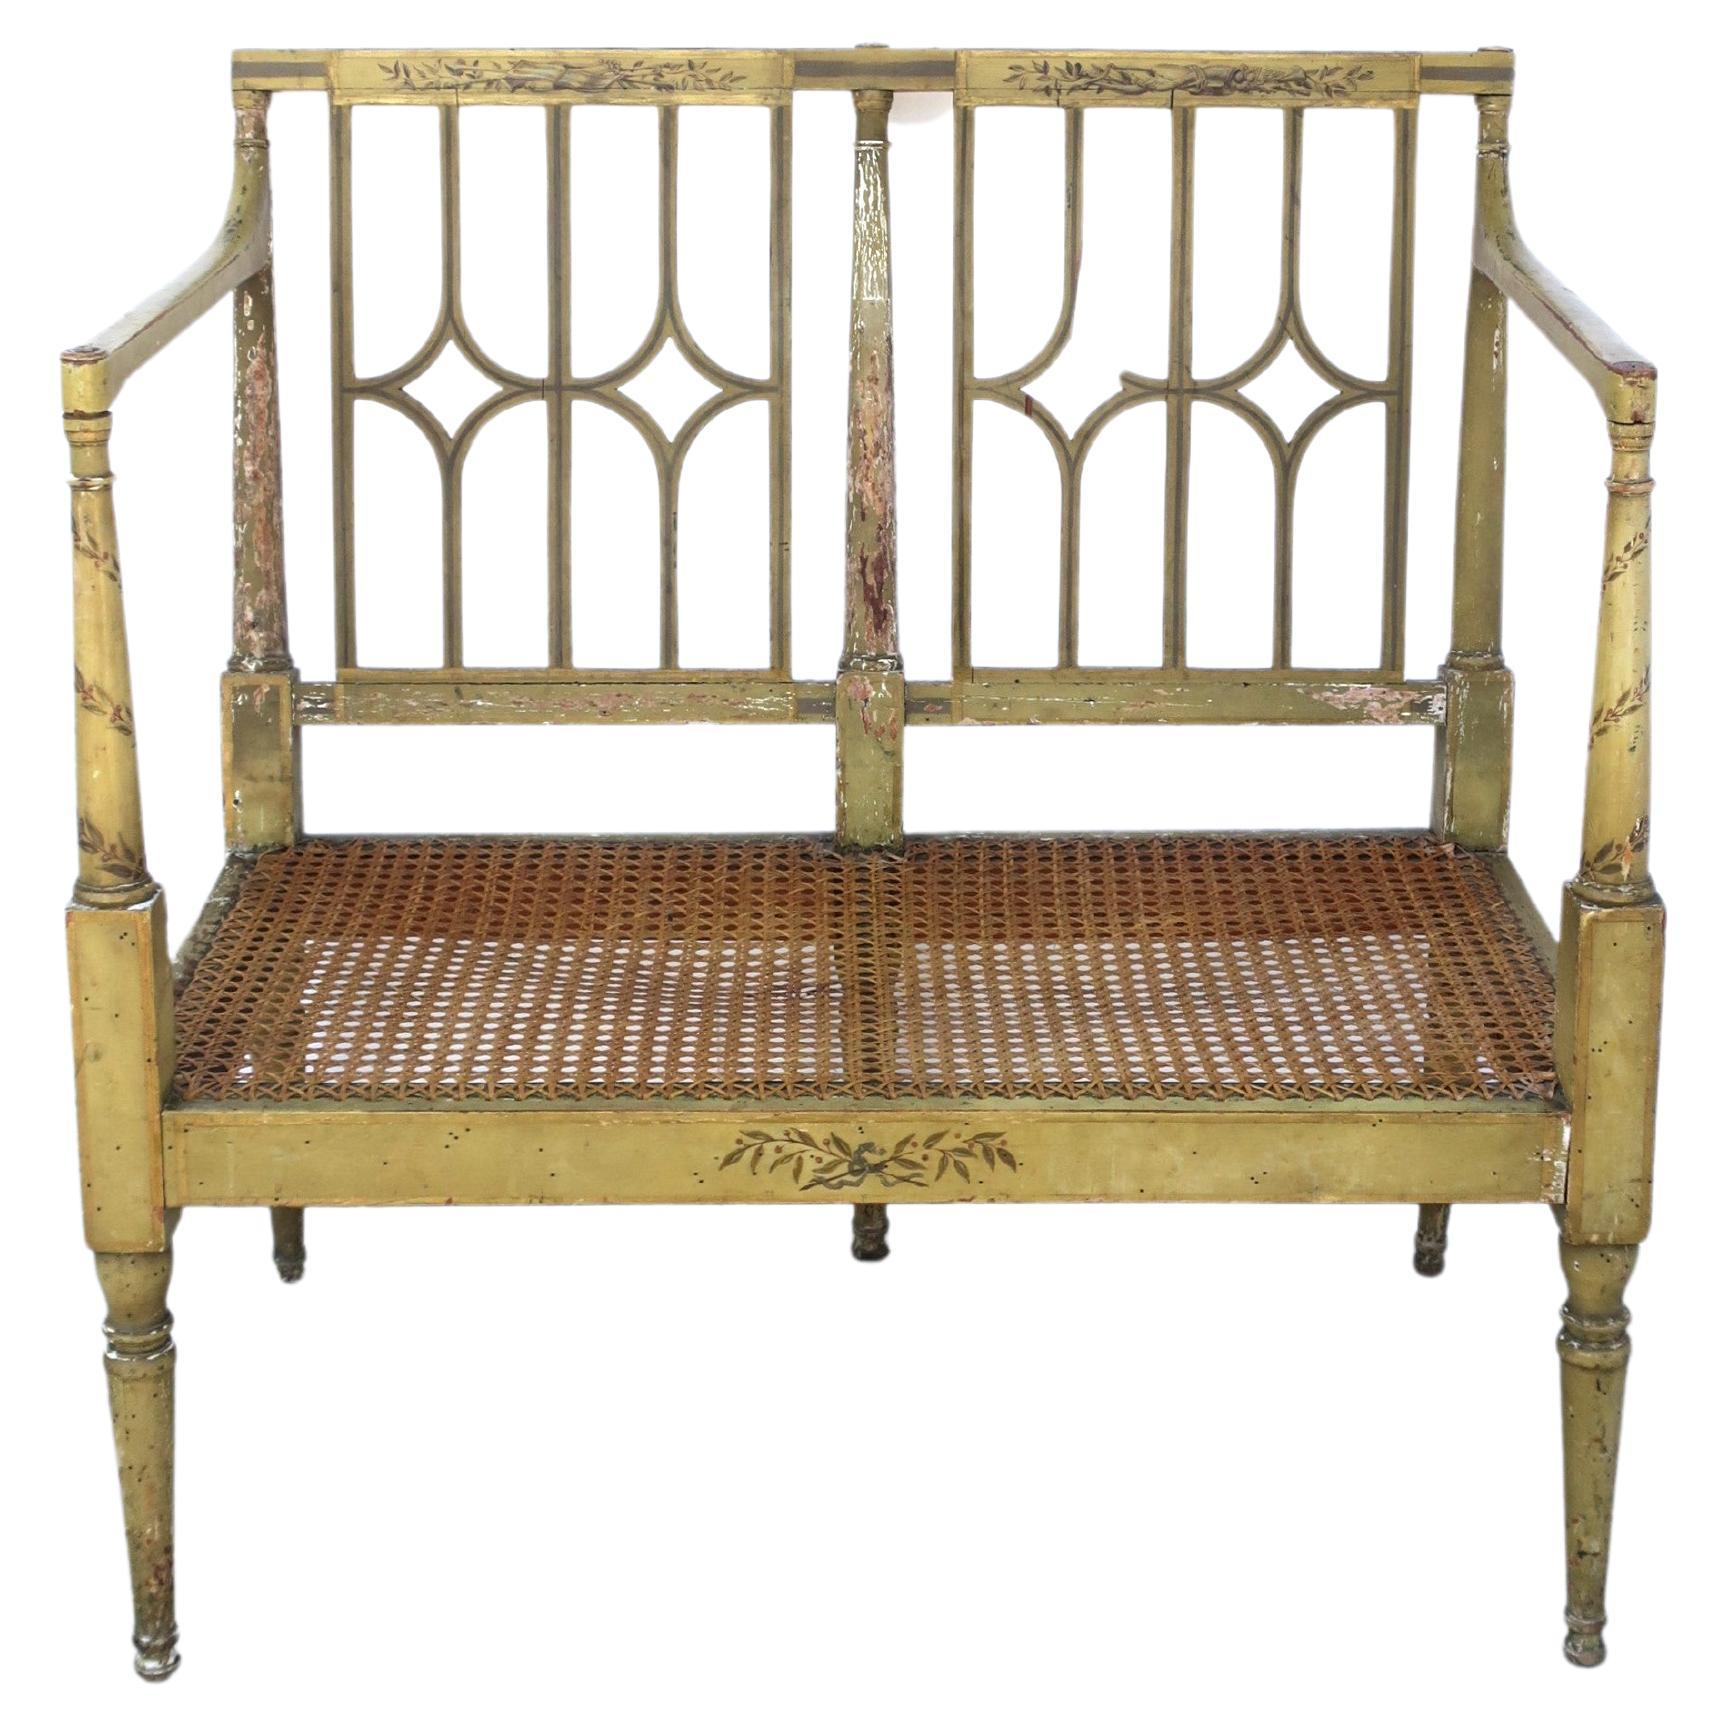 Painted Wood and Wicker Cane Loveseat Bench